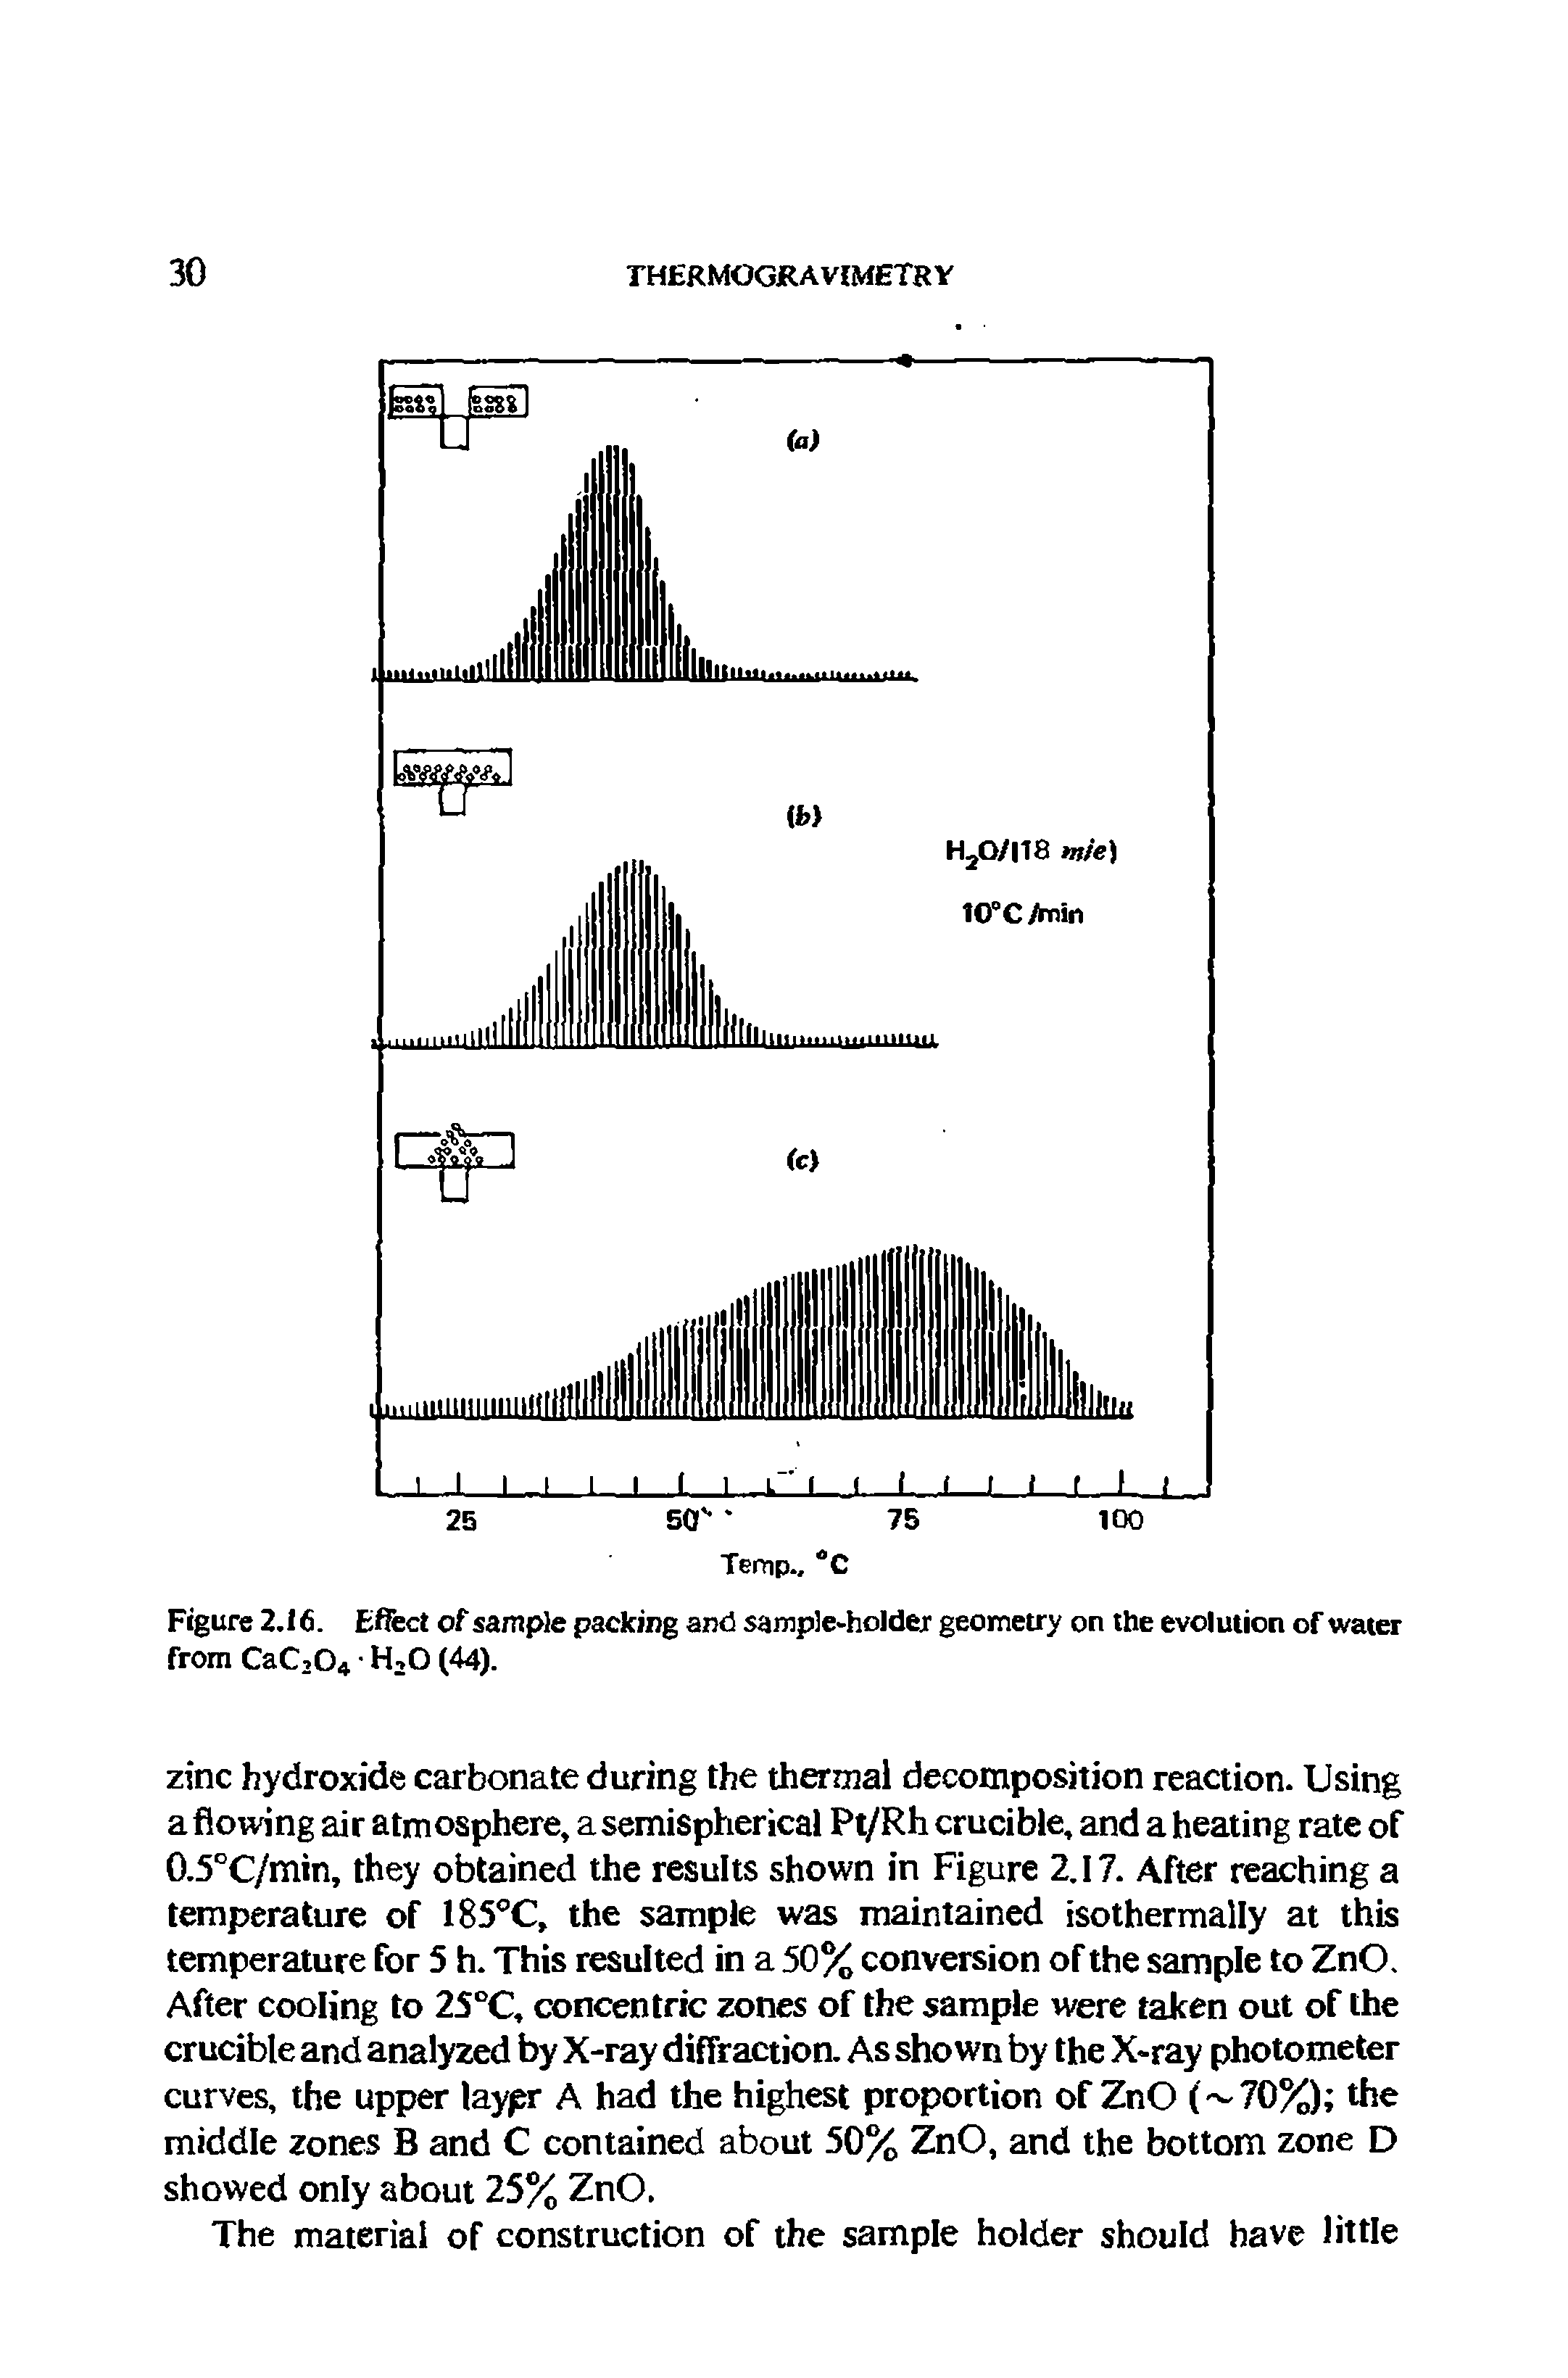 Figure 2.16. Effect of sample packing and sample-holder geometry on the evolution of water from CaC204 H20 (44).